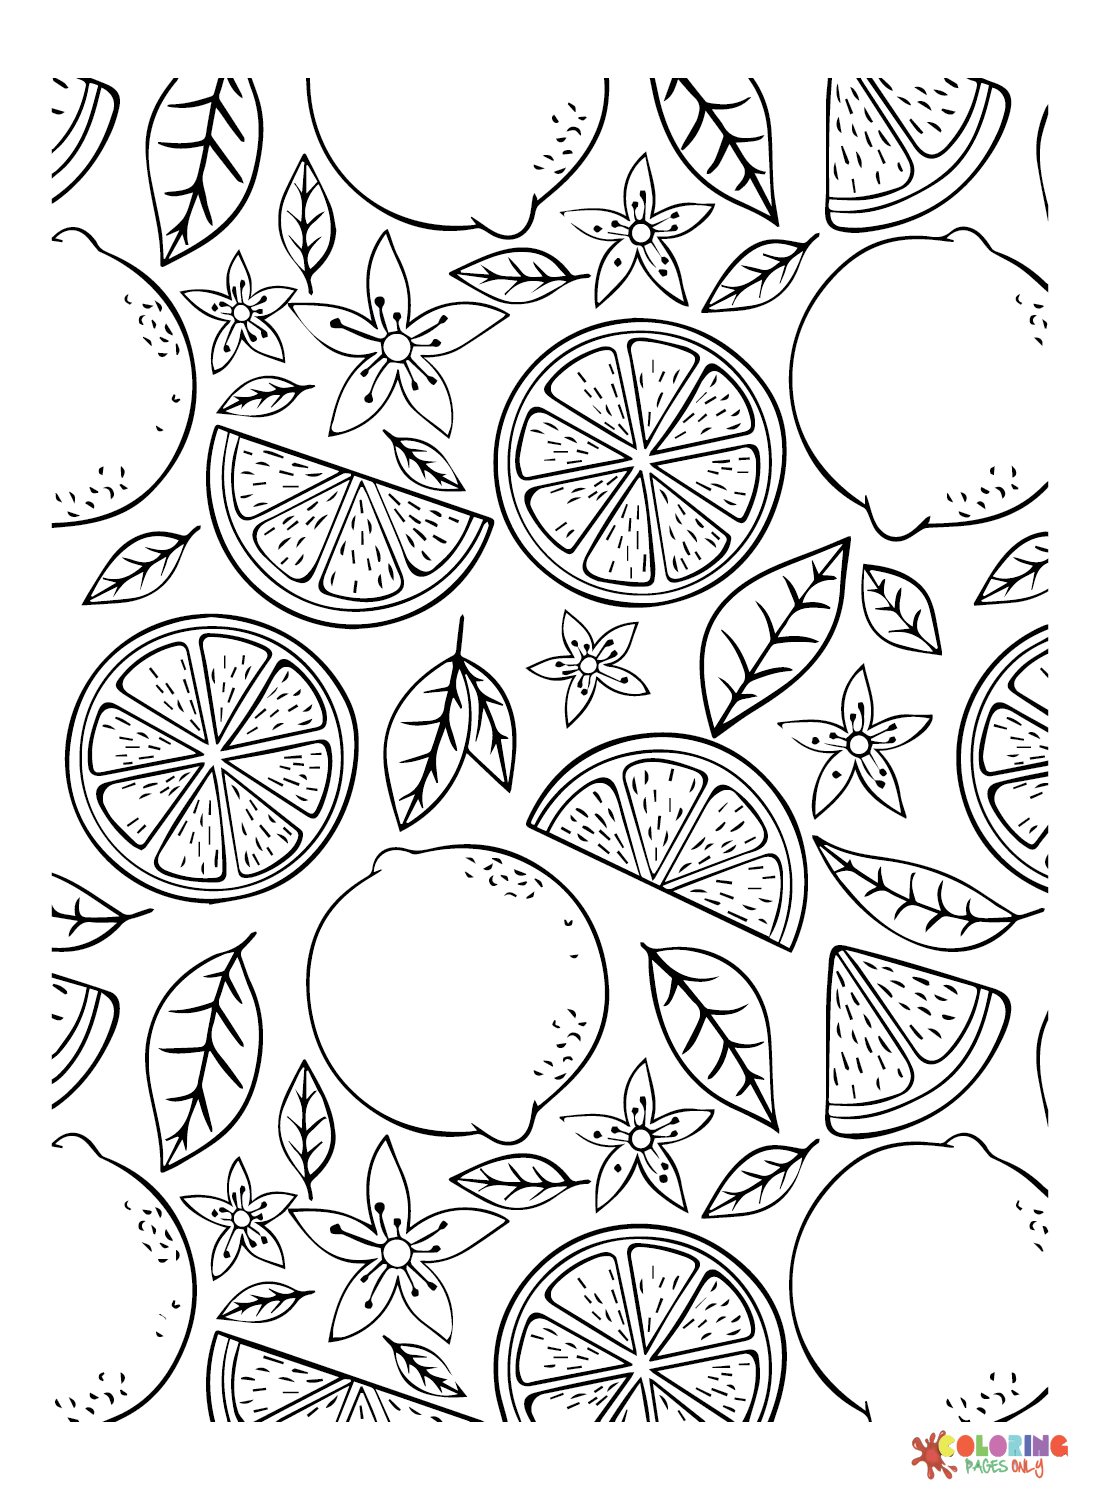 Citrus-fruits Drawing Coloring Page